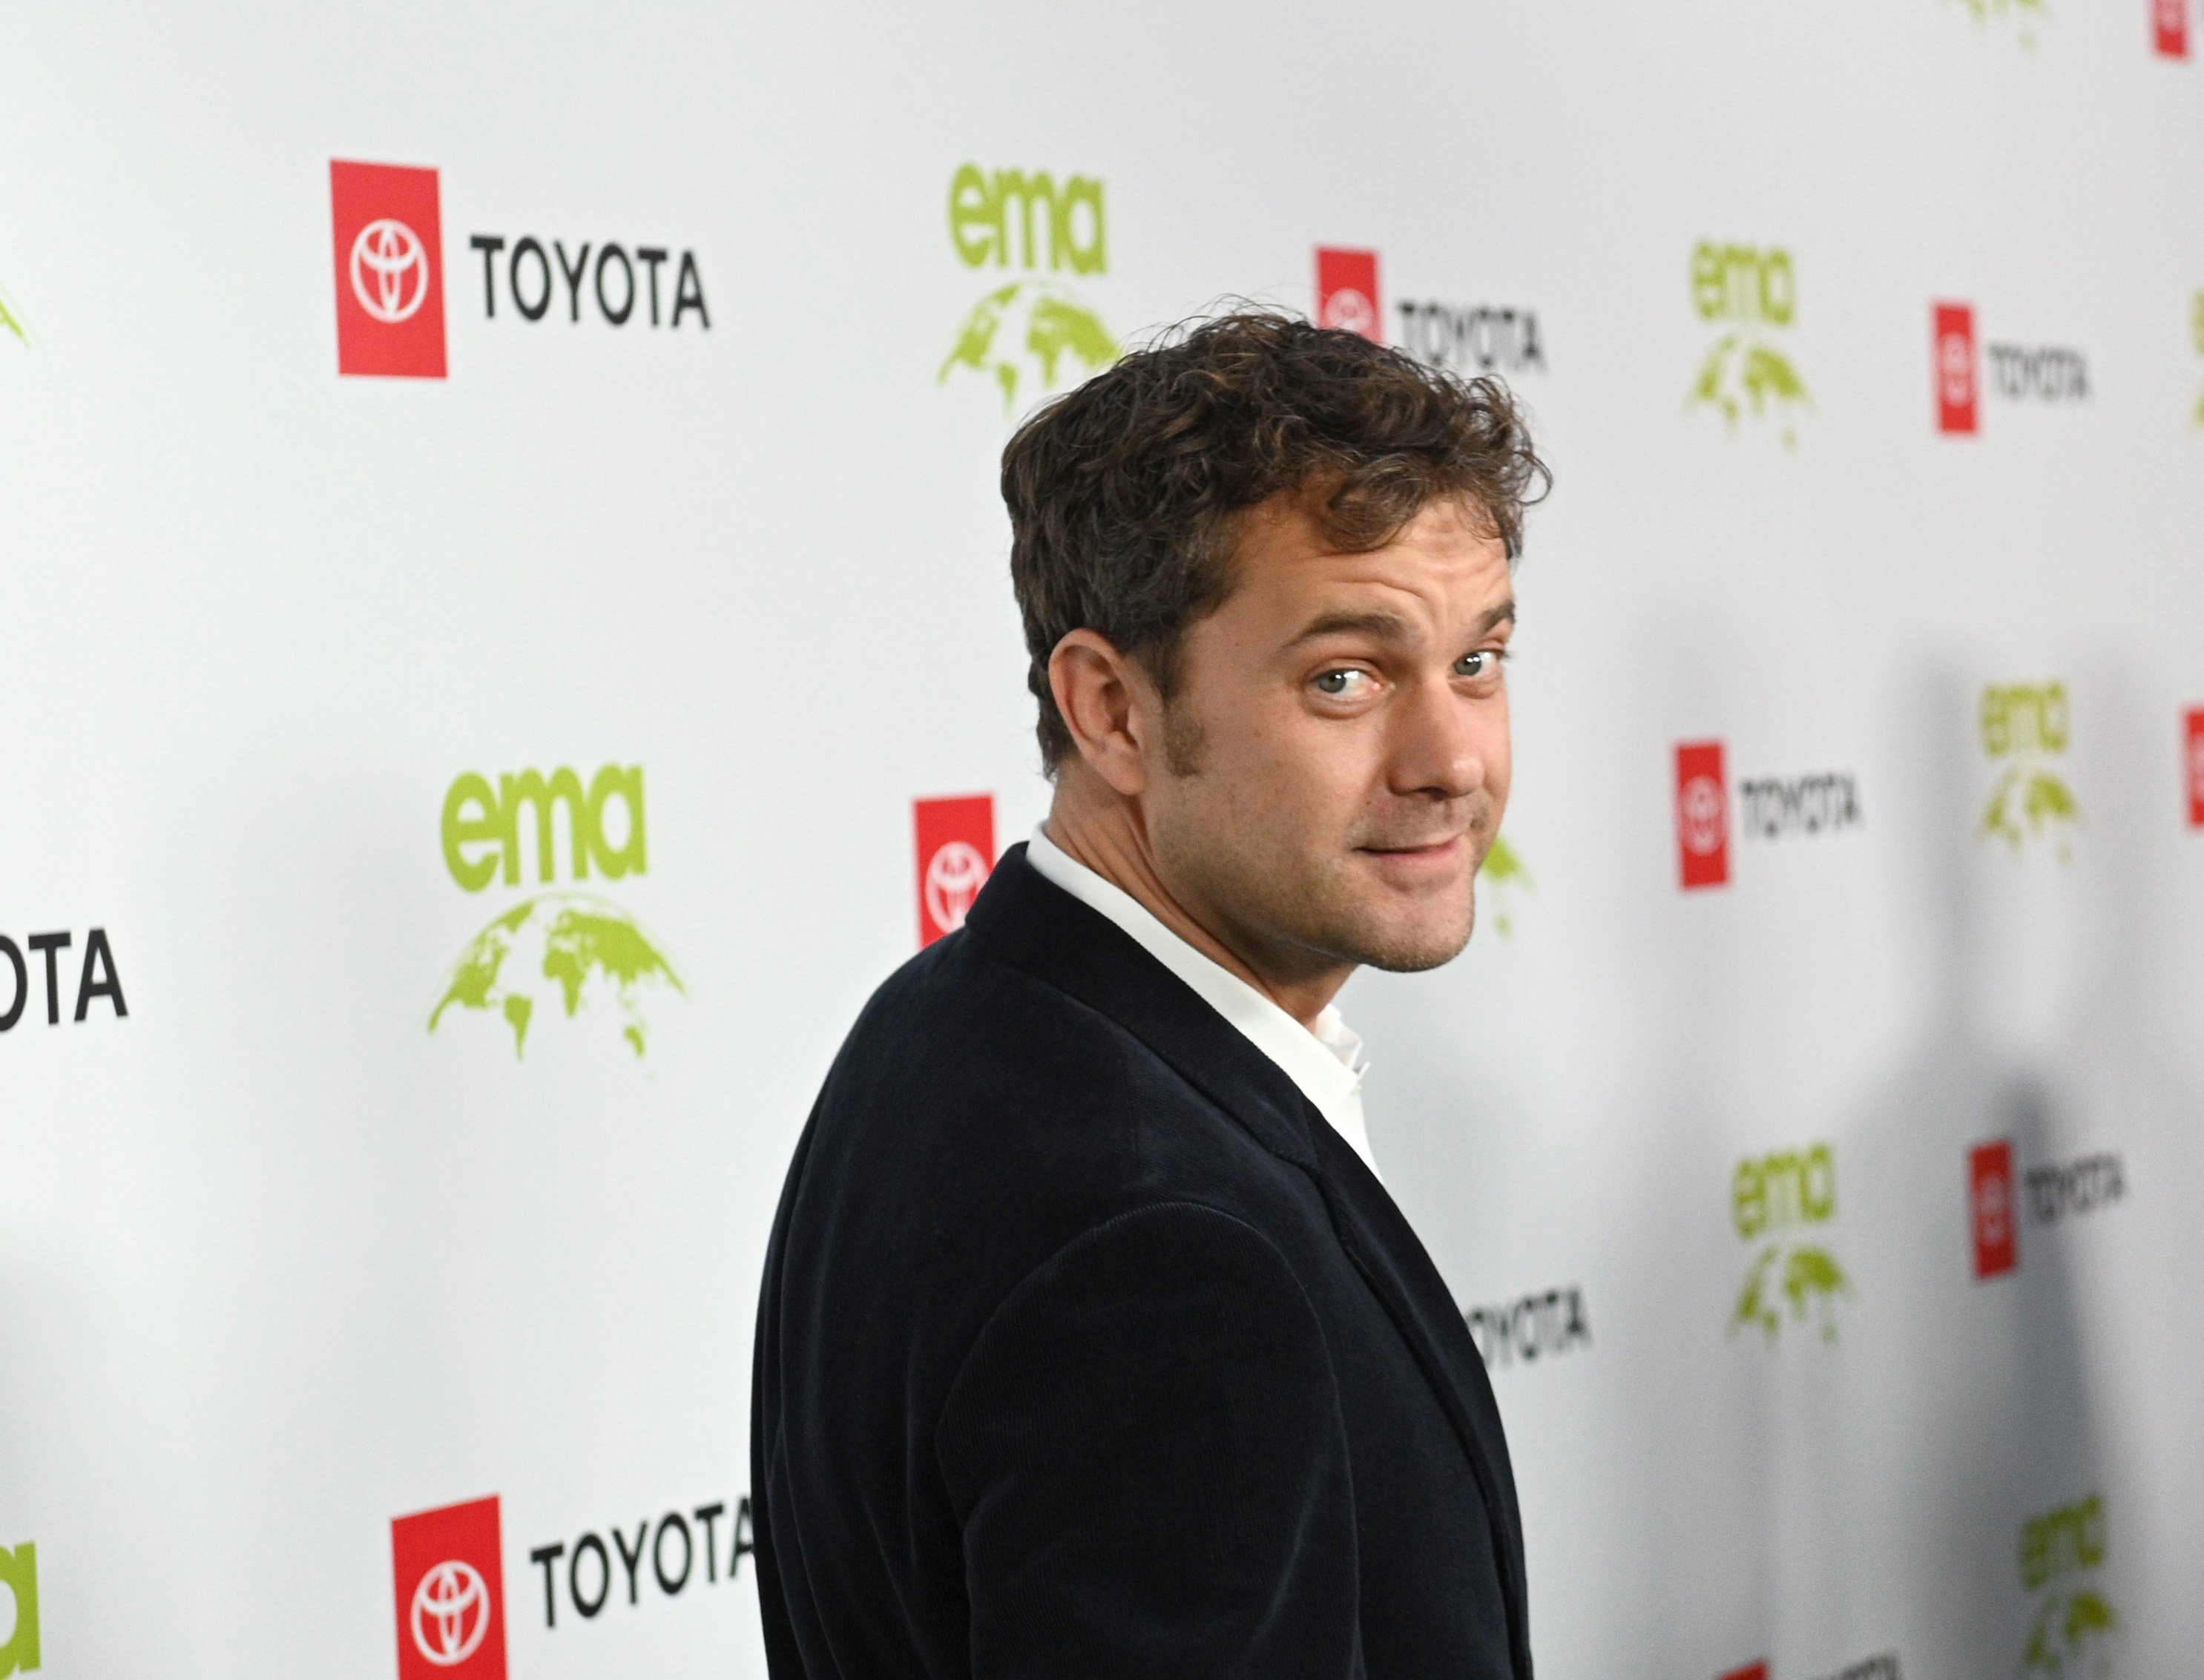 Joshua Jackson attending the Environmental Media Association 2nd Annual Honors Benefit Gala in September 2019. | Photo: Getty Images